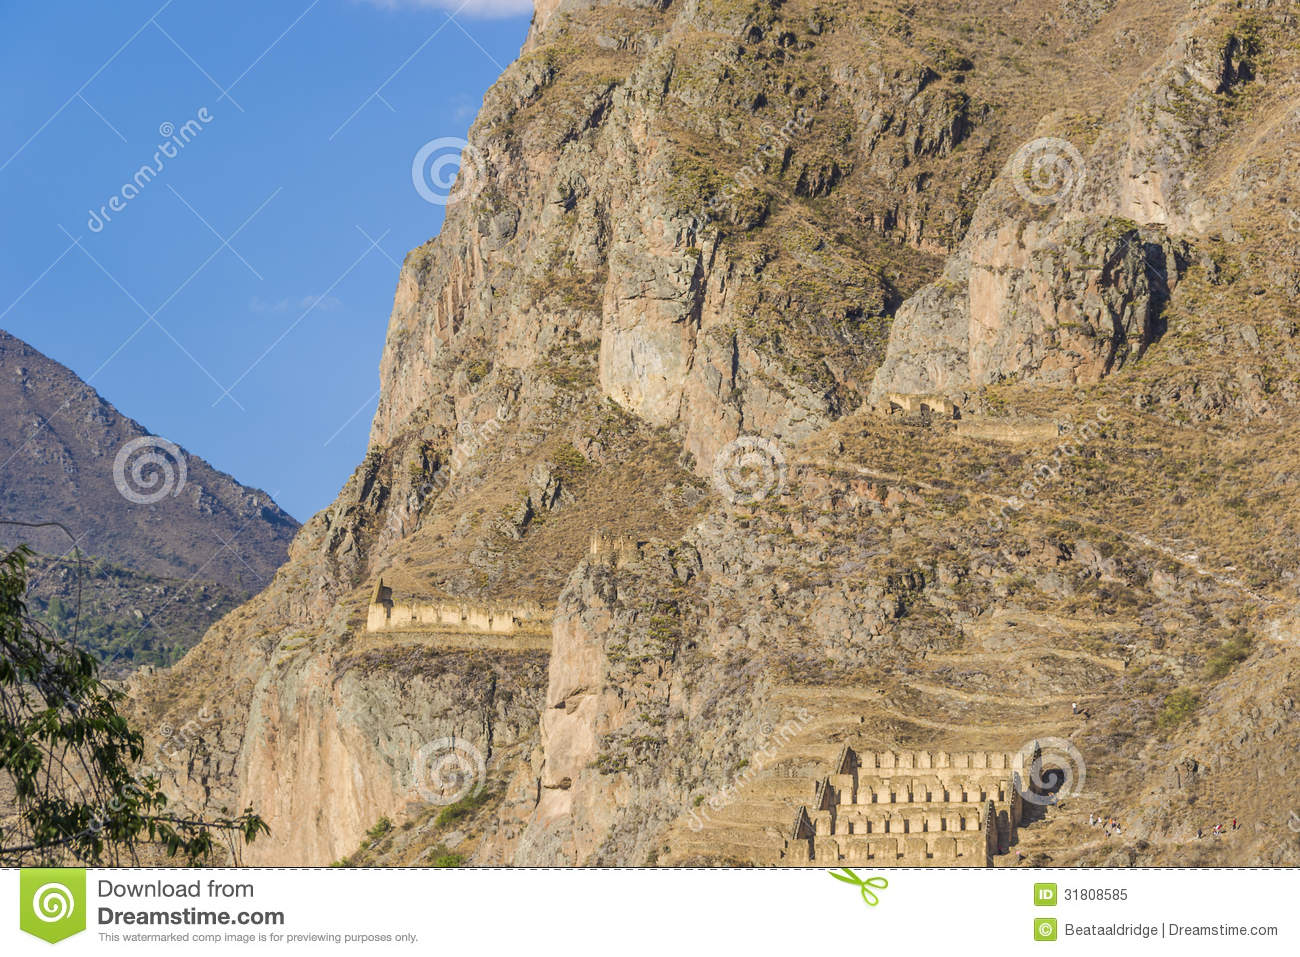 Stone Face Of Inca God And Inca Ruins Royalty Free Stock Photo   Image